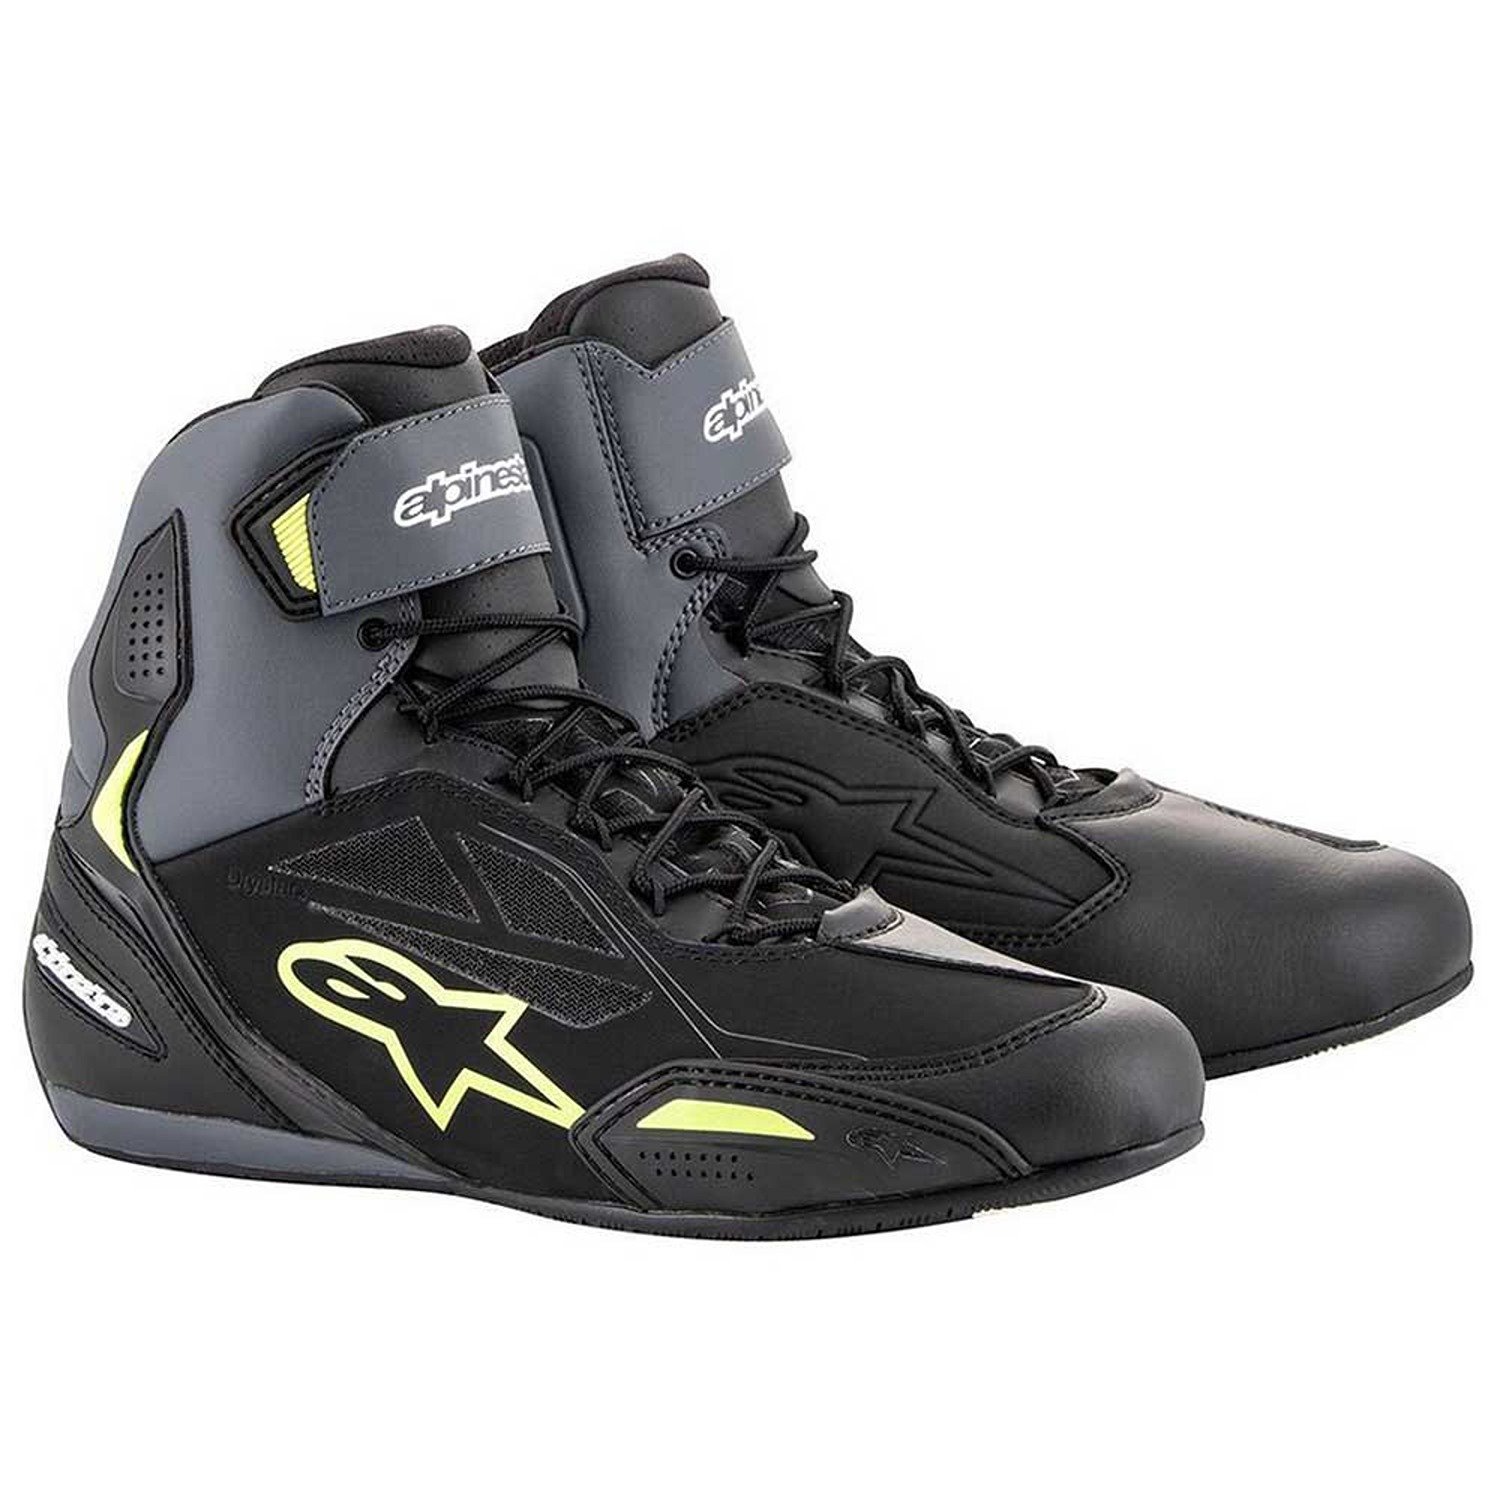 Image of Alpinestars Faster-3 Shoes Black Yellow Fluo Size US 6 EN